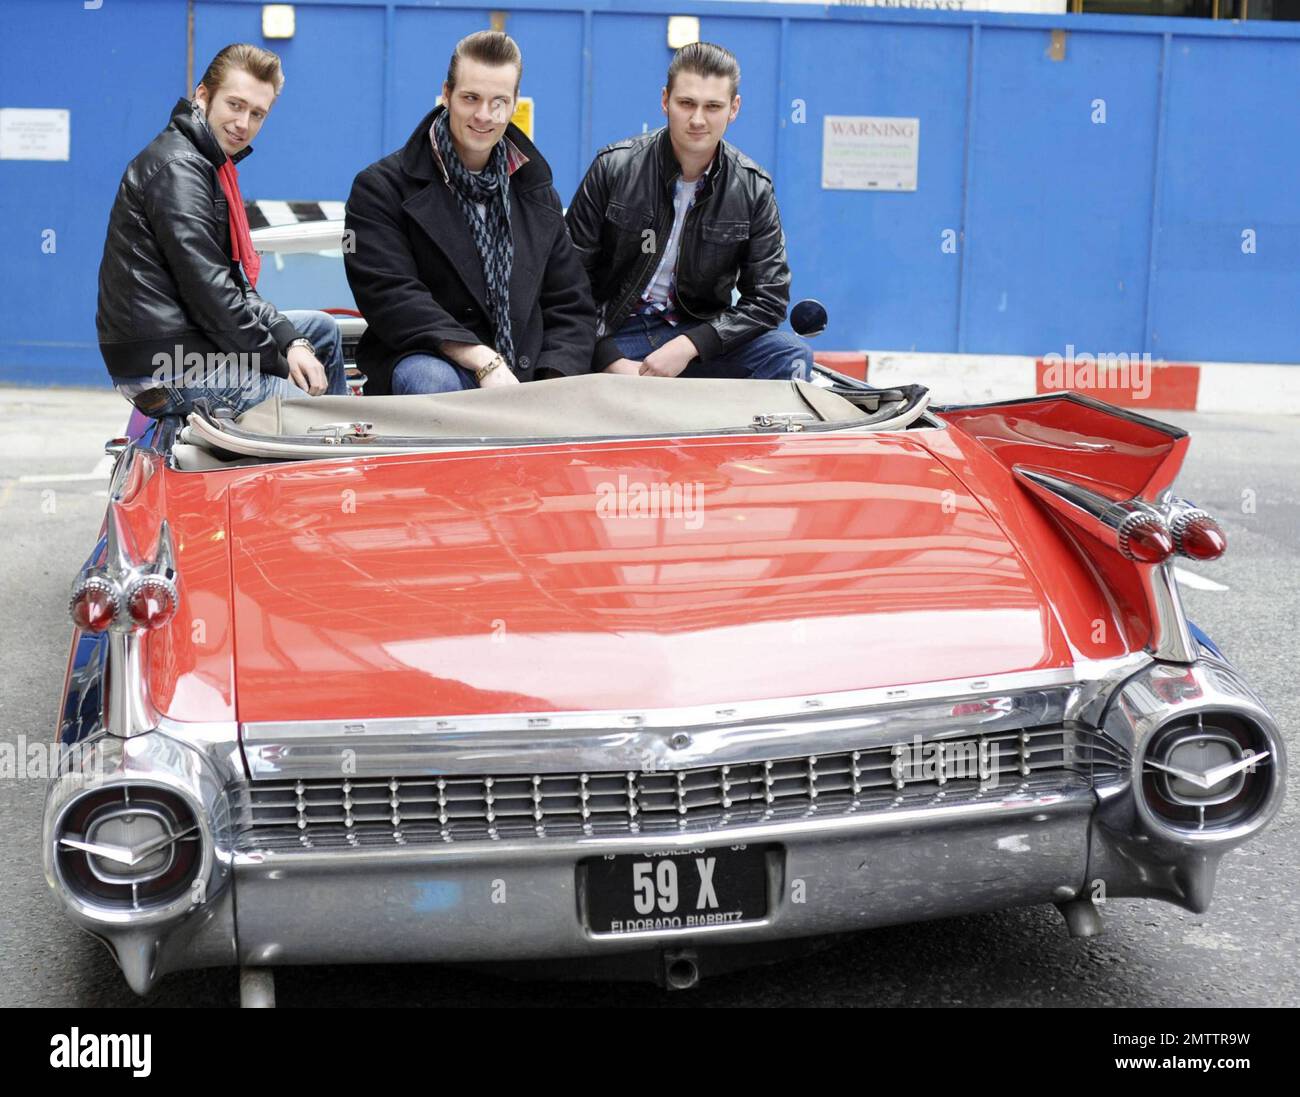 Berlin-bred rockabilly musicians The Baseballs pose in their classic red convertible Cadillac outside the BBC Radio 2 studios after promoting their new album Strike.  The trio, Sam, Digger and Basti, are known for covering popular songs and revamping them with a 50s-style rock twist.  According to reports the group also treated passersby to an impromptu version of Rihanna's song 'Umbrella'.  London, UK. 05/11/10.   . Stock Photo